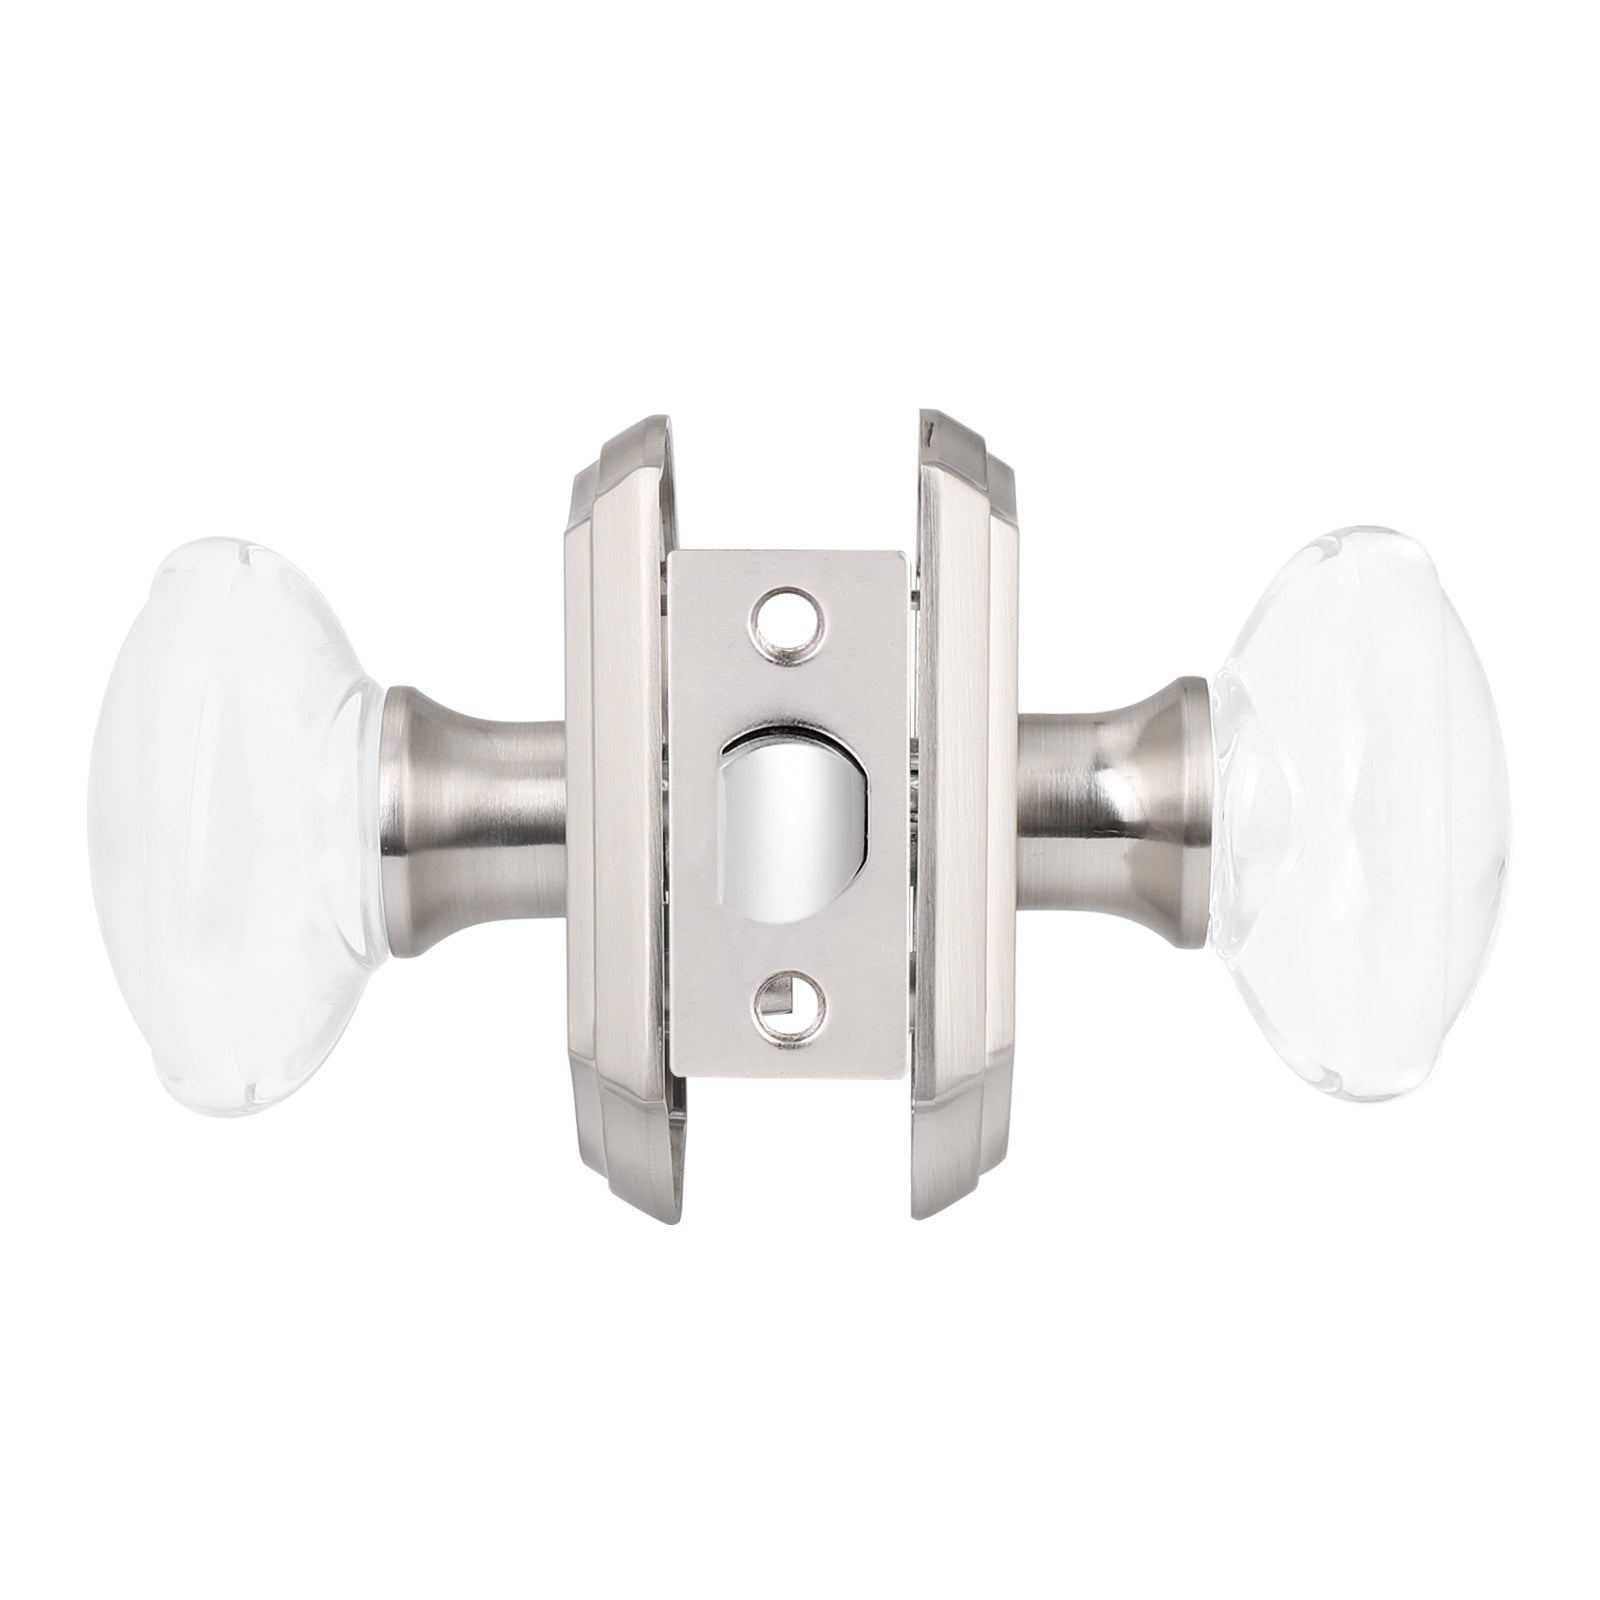 Oval Crystal Passage Door Knob Lock with Satin Nickel Arched Rosette DLC9SNPS